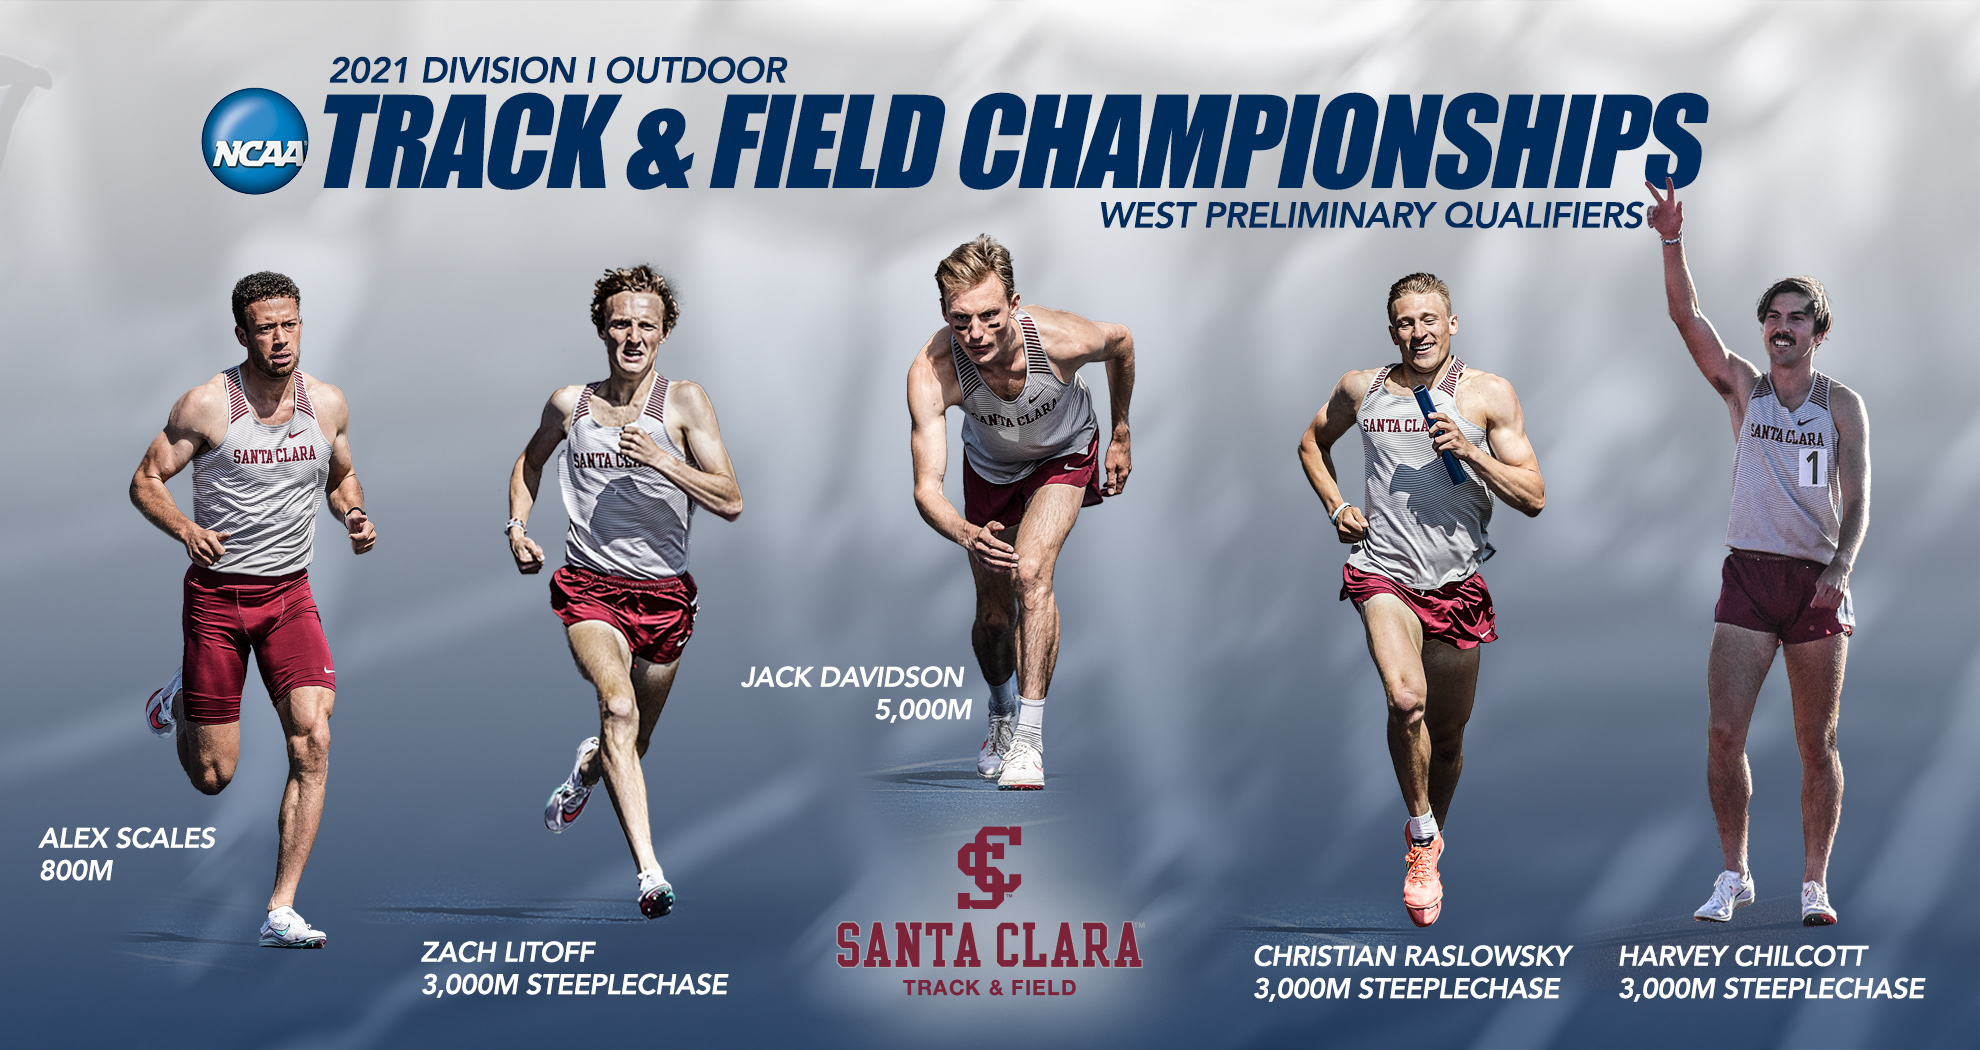 Program-Record Five Track & Field Runners Qualify for NCAA Championship West Preliminary Meet